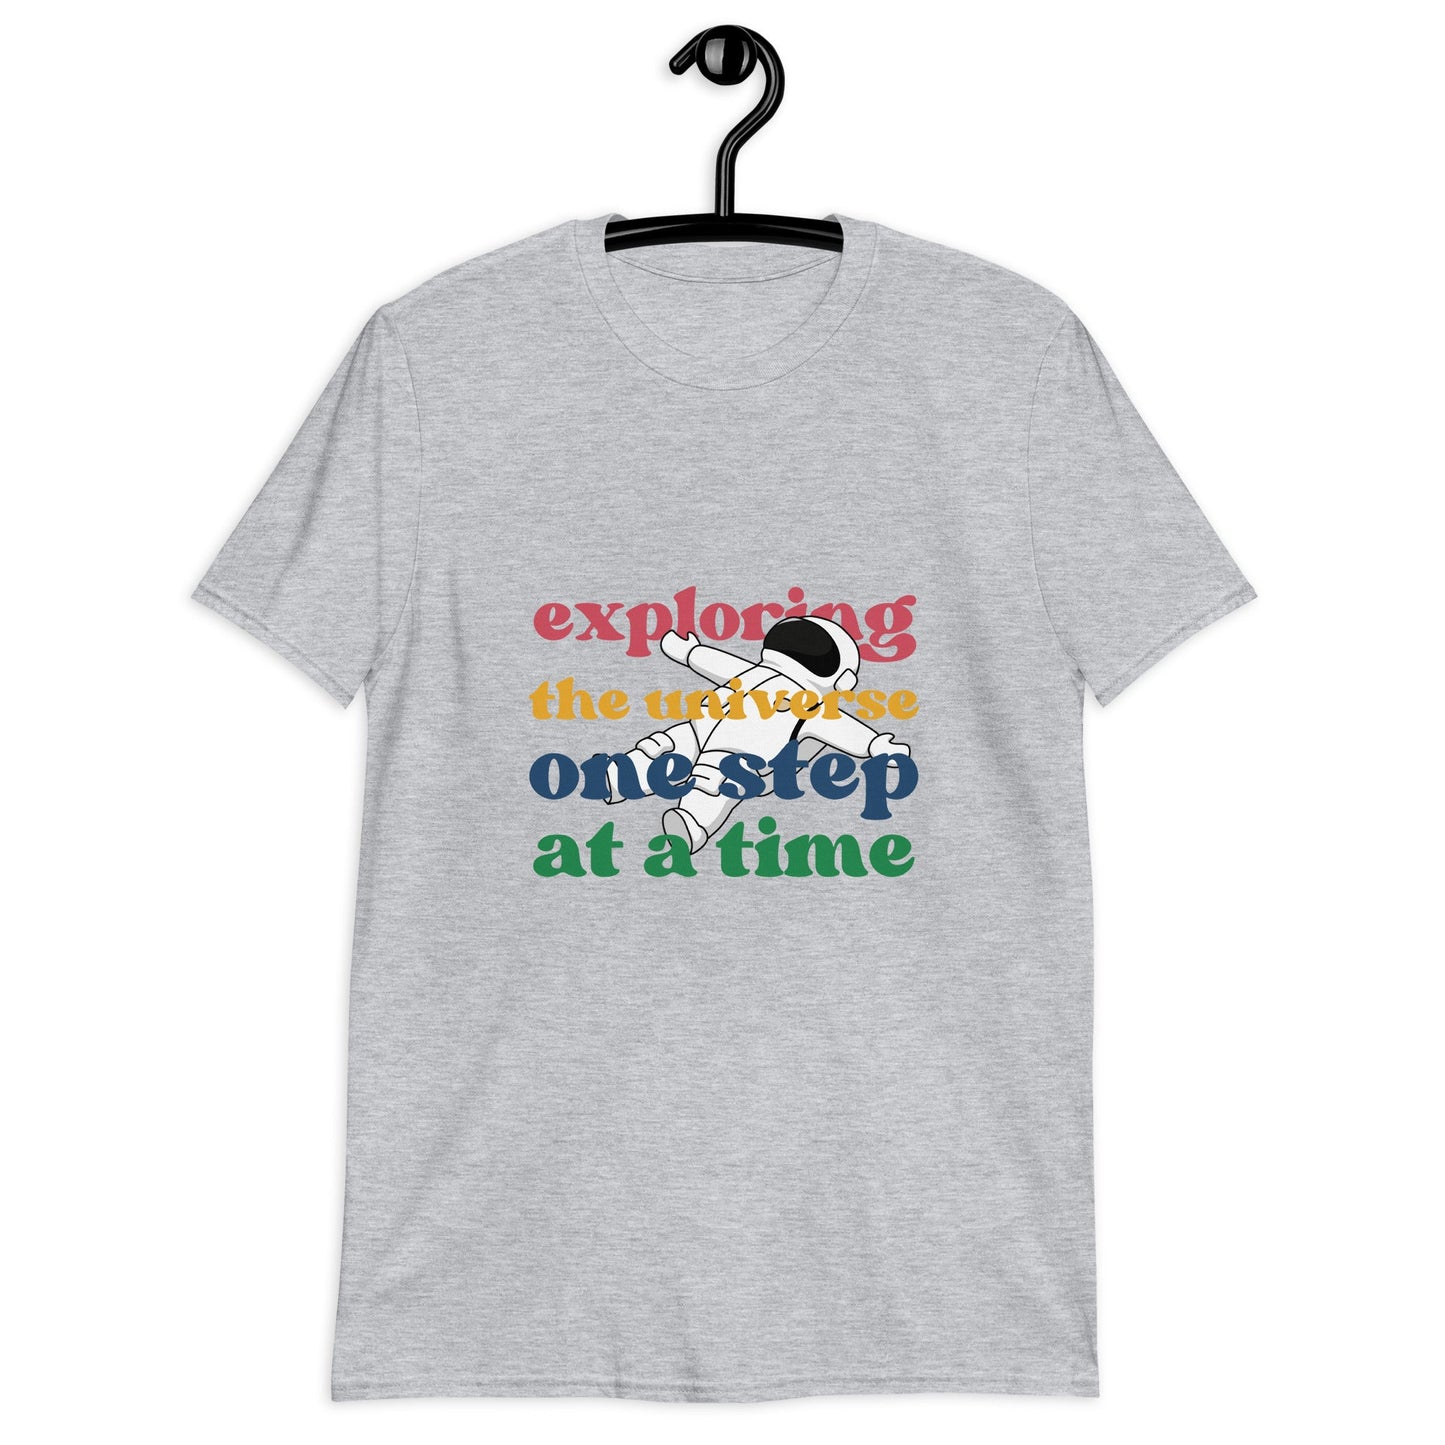 Astronaut Exploring the Universe, One Step at a Time. Unisex T Shirt